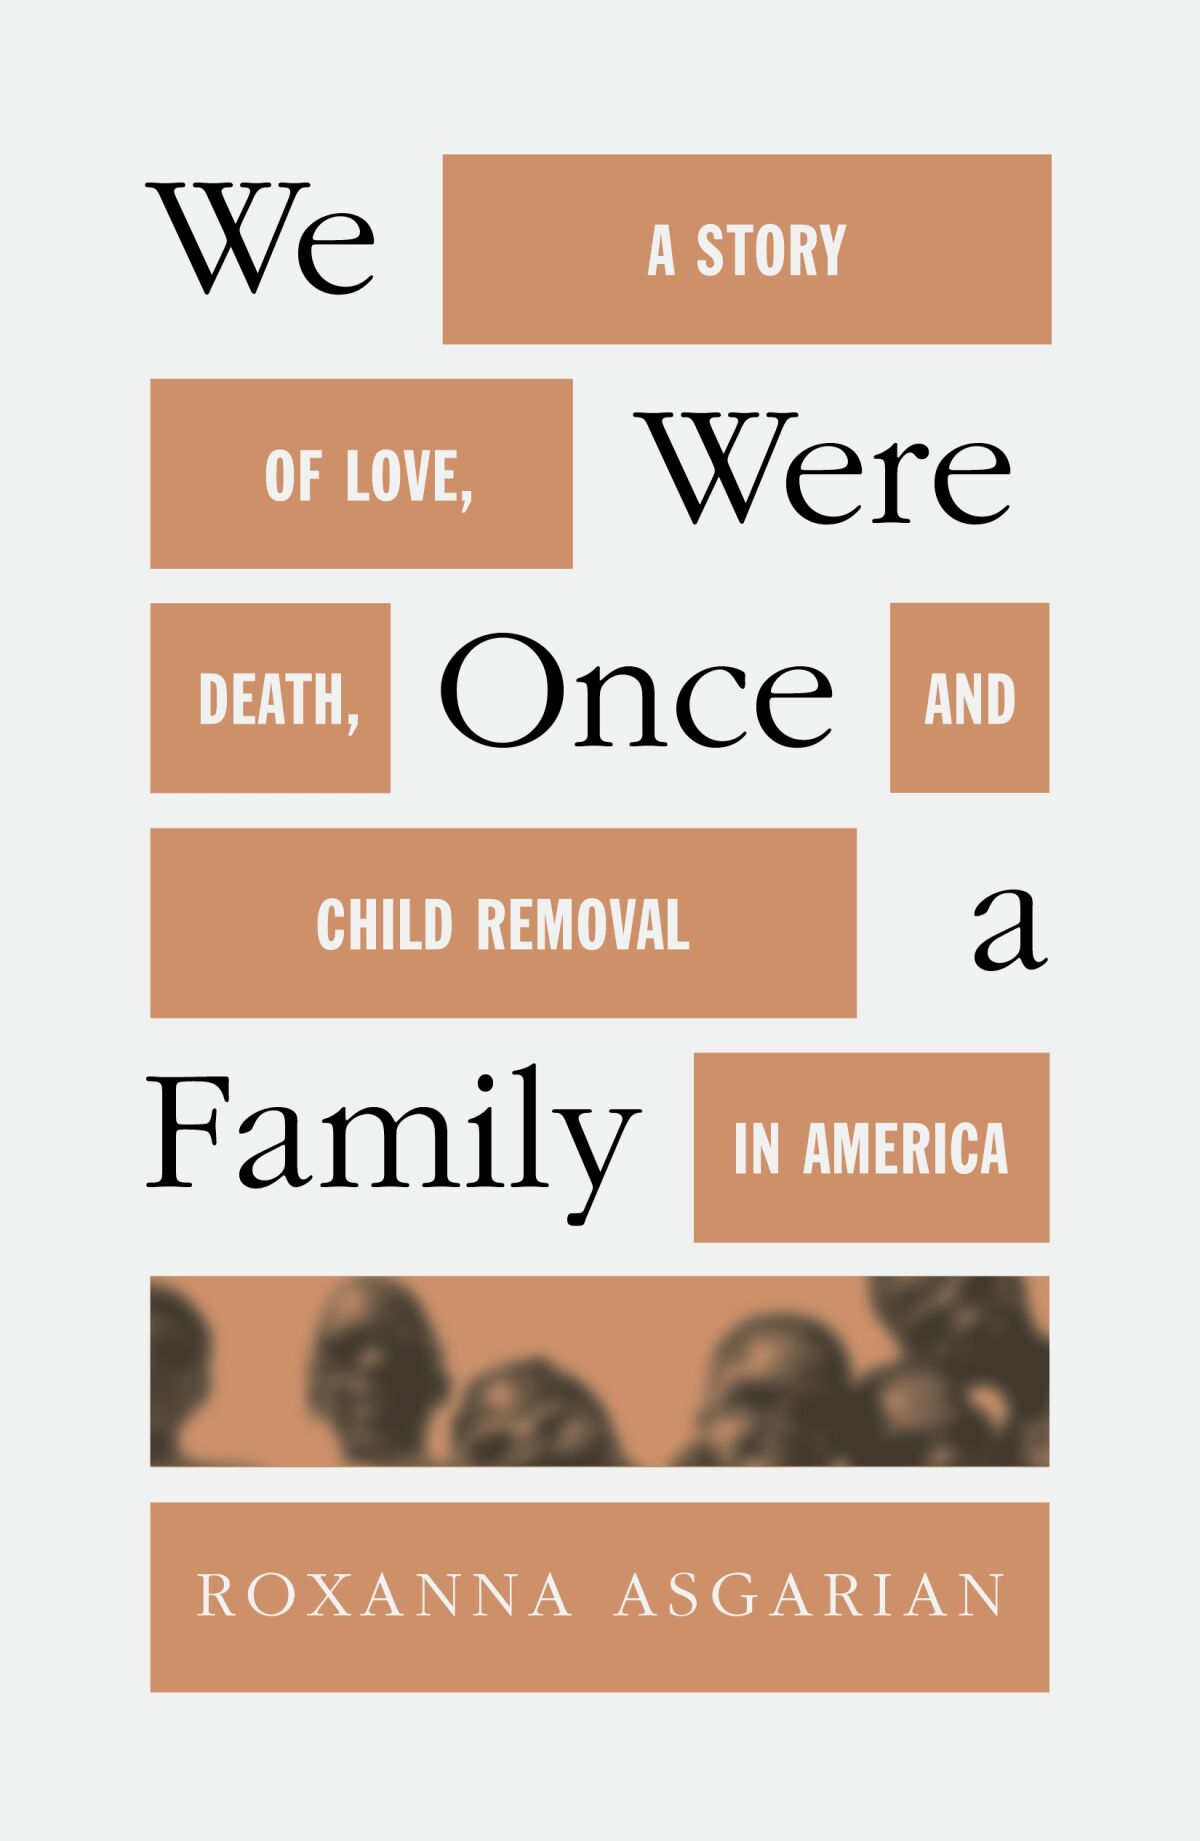 The cover of 'We Were Once a Family' by Roxanna Asgarian